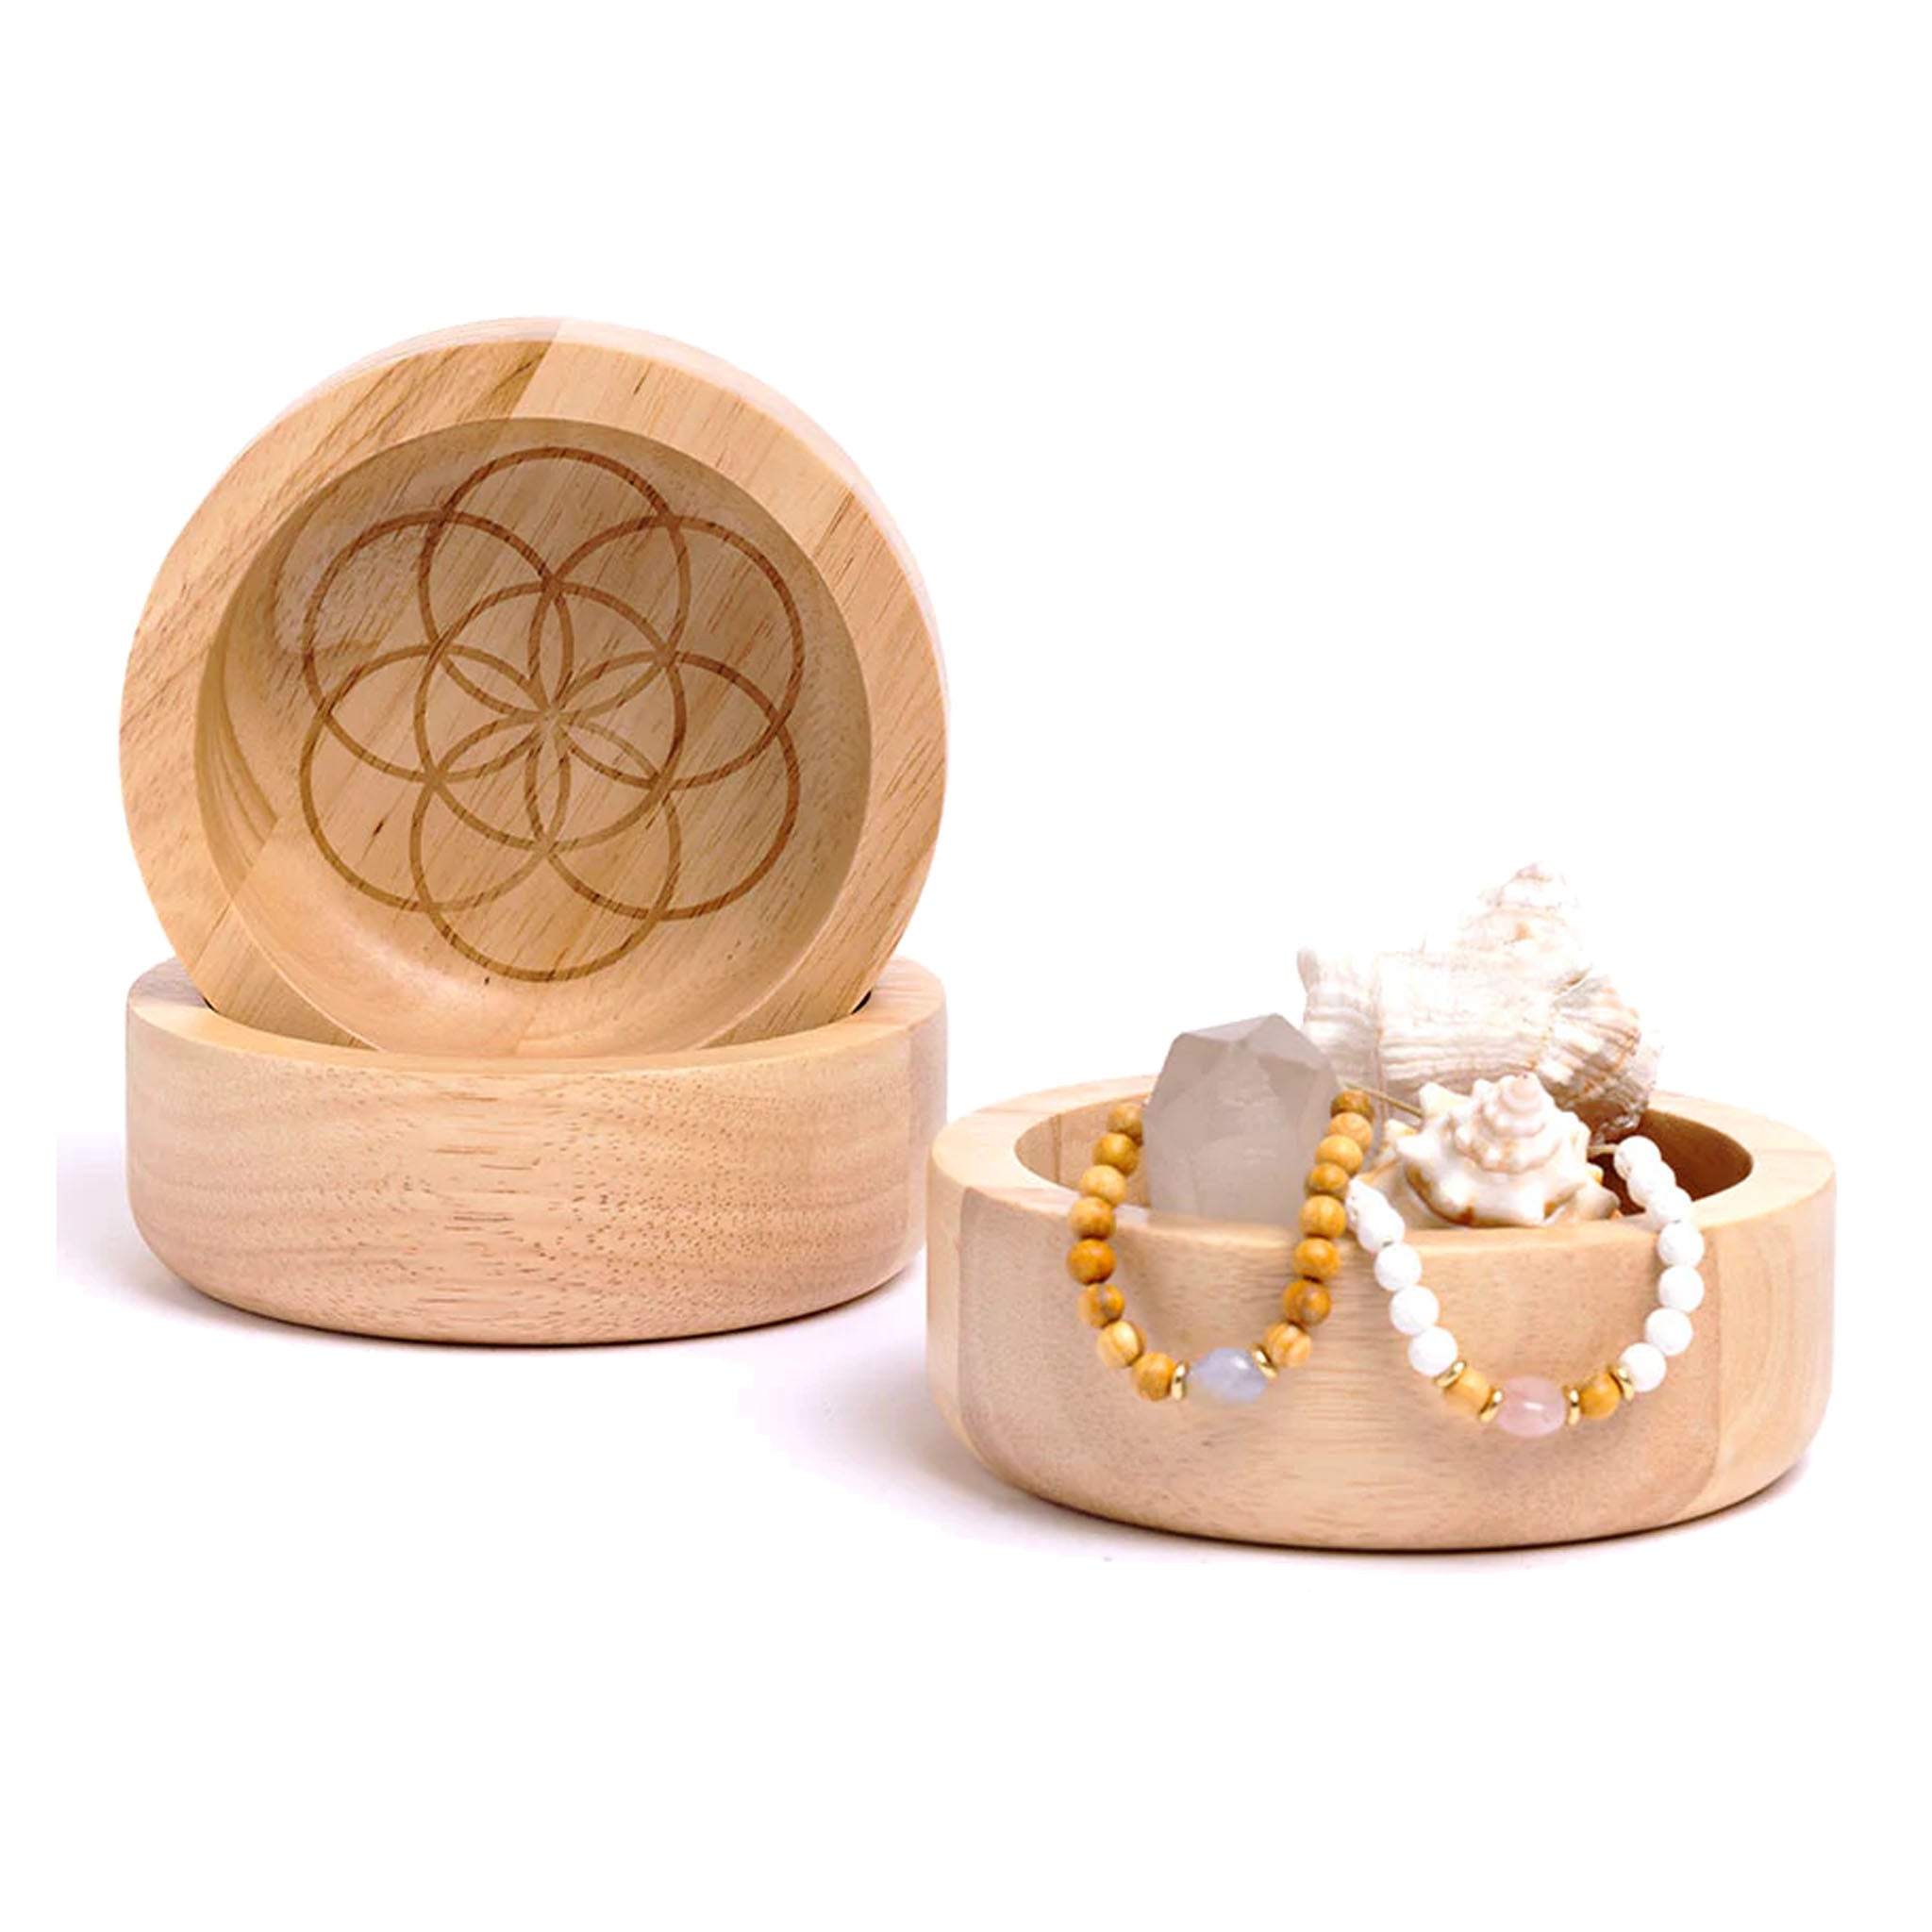 Seed of Life Bowl - Rubberwood